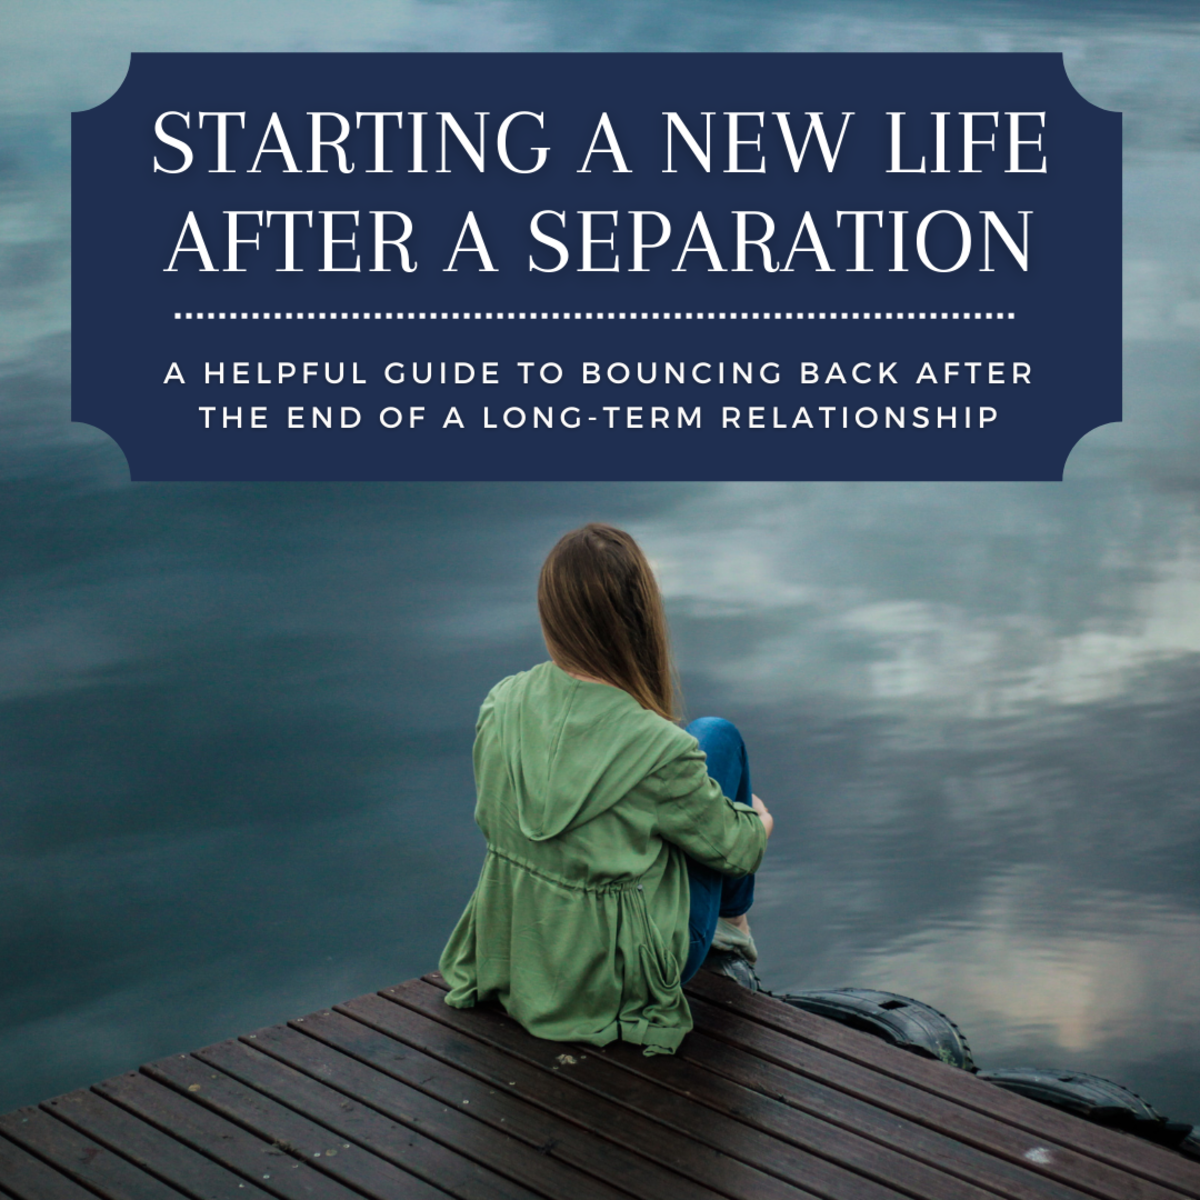 How to Start a New Life After Separation